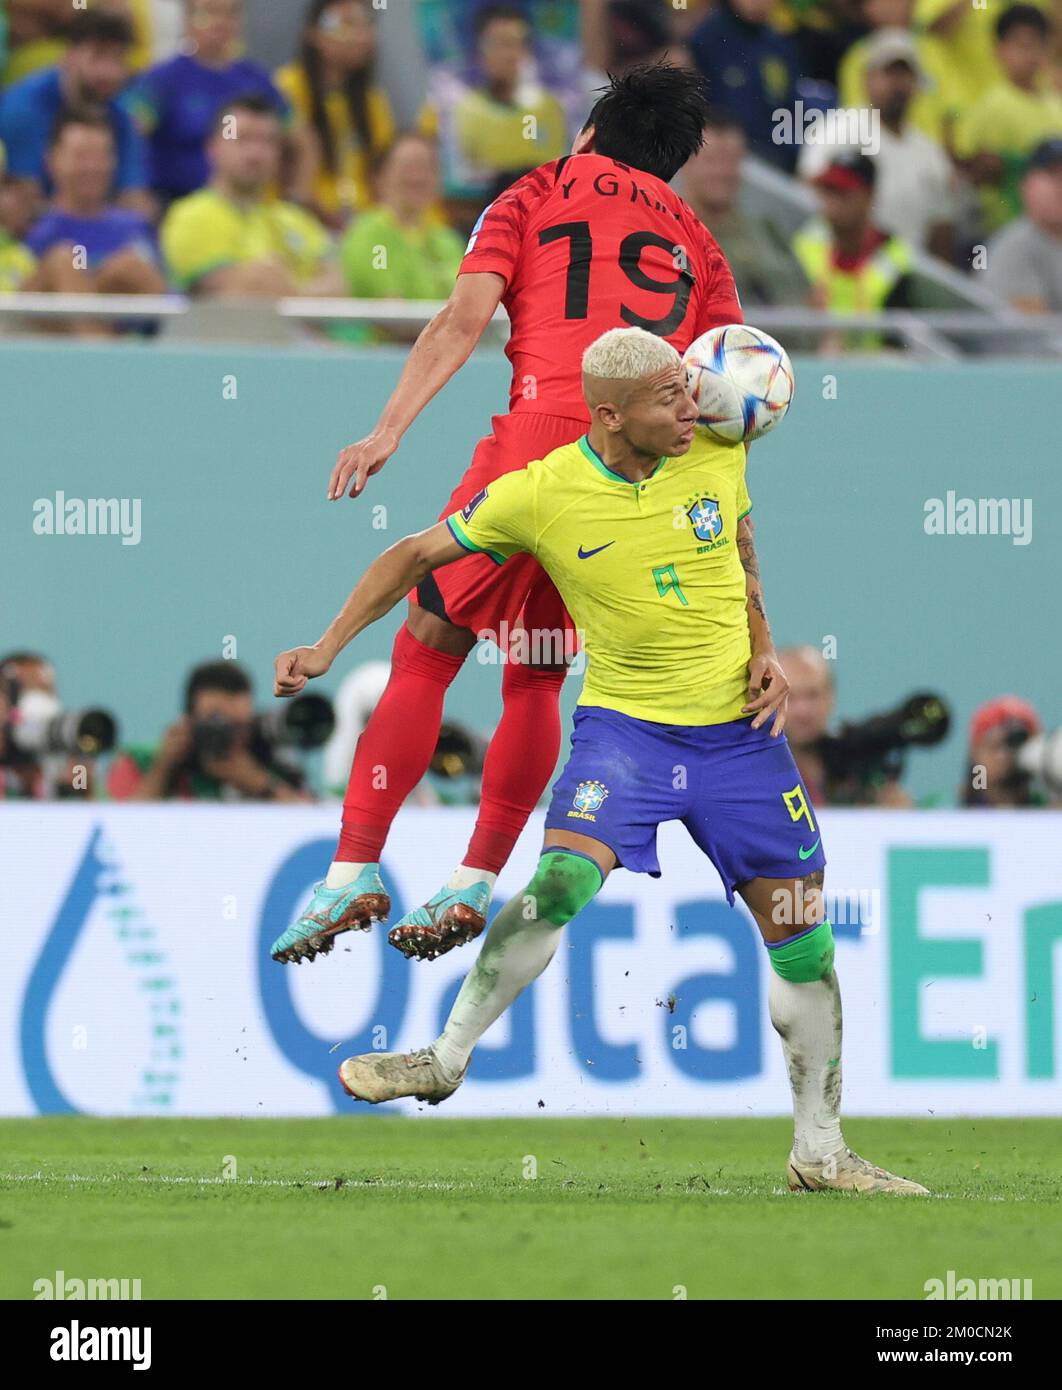 Doha, Qatar. 5th Dec, 2022. Kim Young-gwon (top) of South Korea vies with Richarlison of Brazil during their Round of 16 match at the 2022 FIFA World Cup at Stadium 974 in Doha, Qatar, Dec. 5, 2022. Credit: Xu Zijian/Xinhua/Alamy Live News Stock Photo